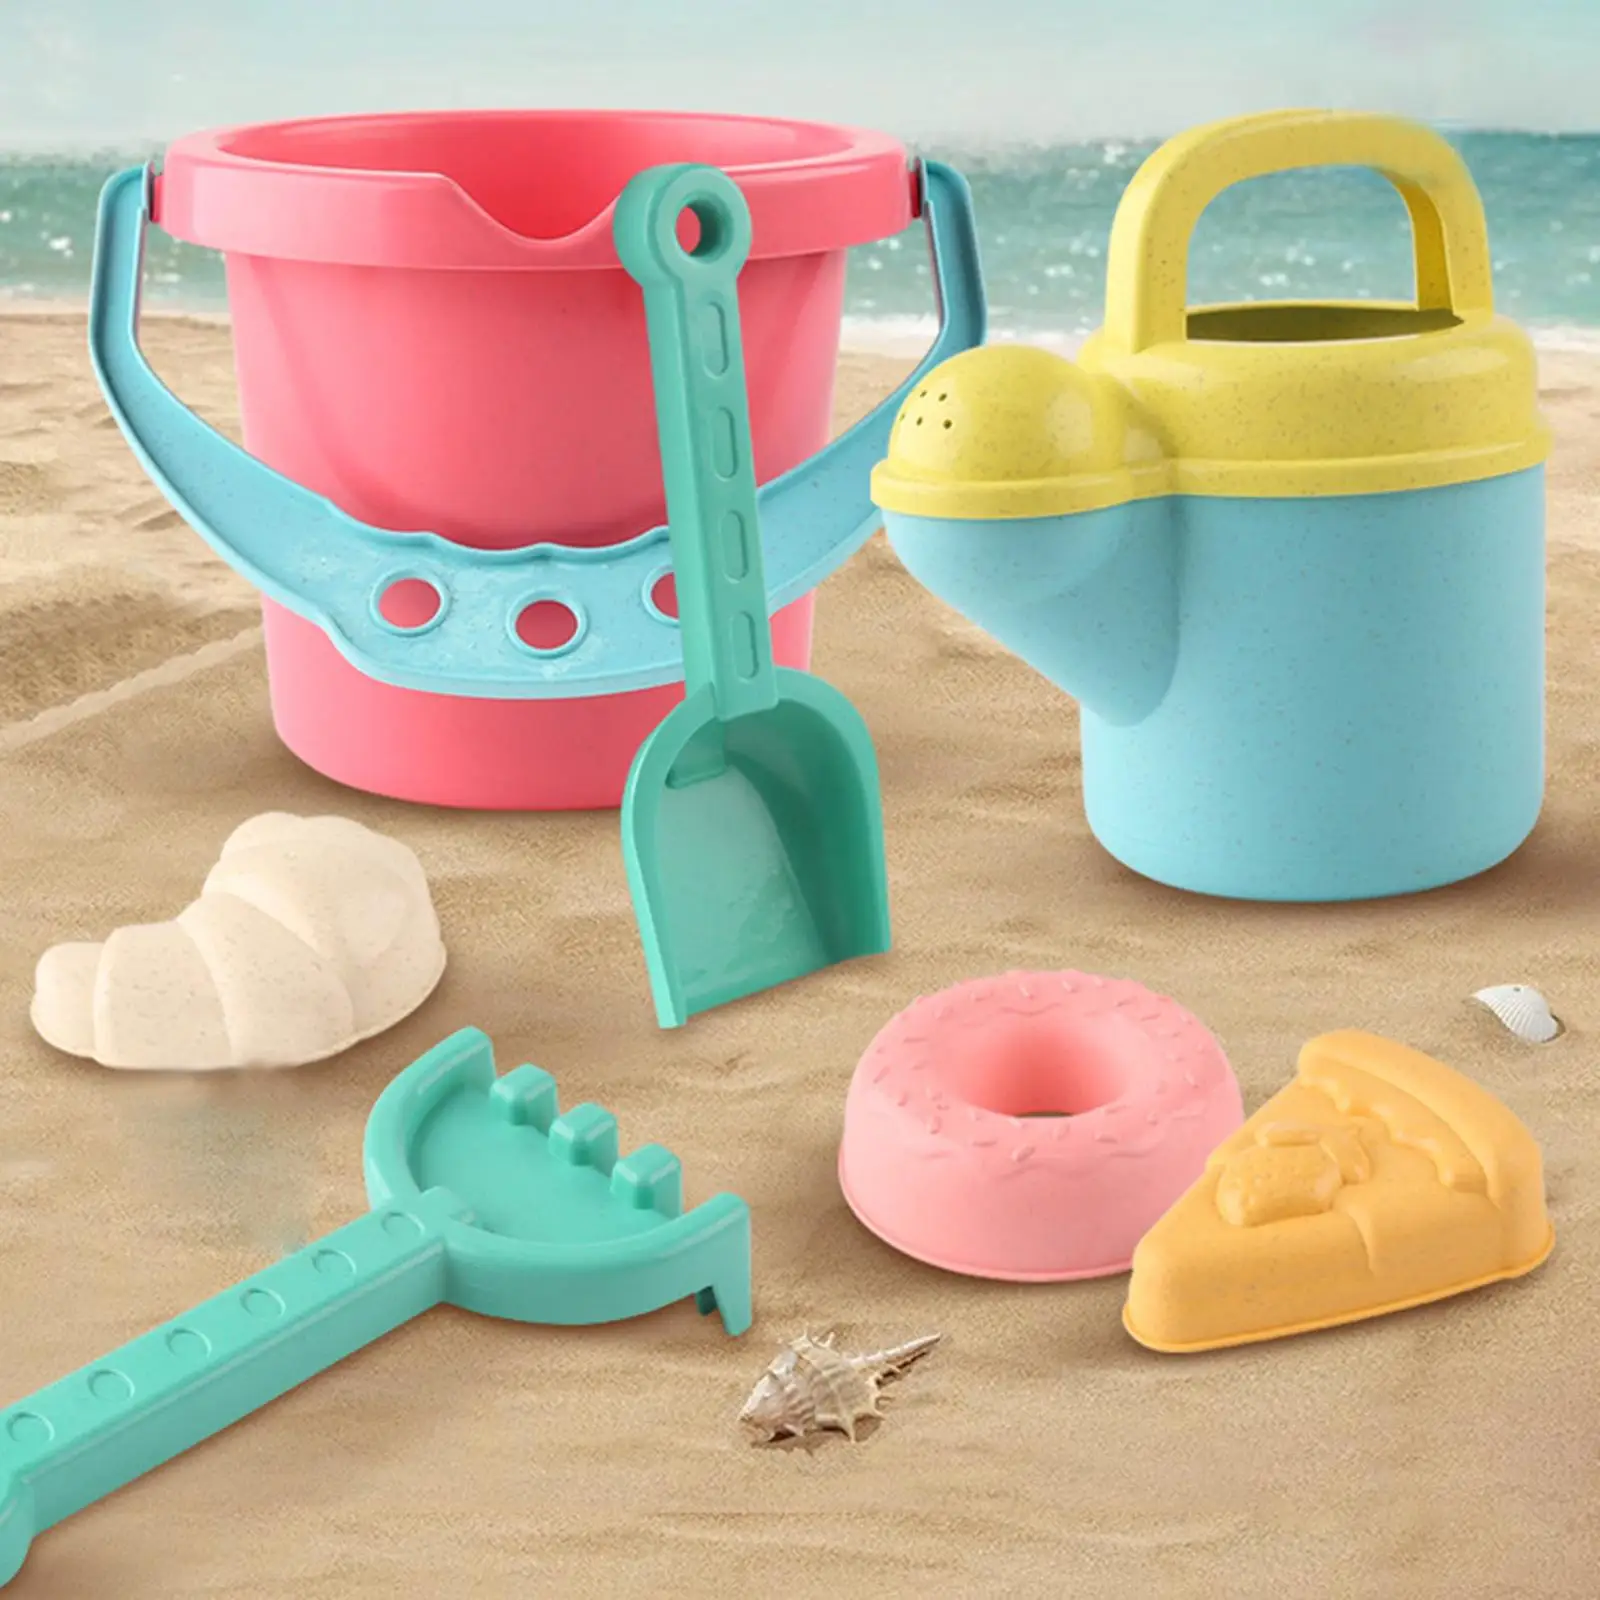 

7Pcs Travel Beach Toy Montessori Sand Toys Watering Can and Beach Bucket for Boys and Girls Kids Bathtime Toy Birthday Age 3-10